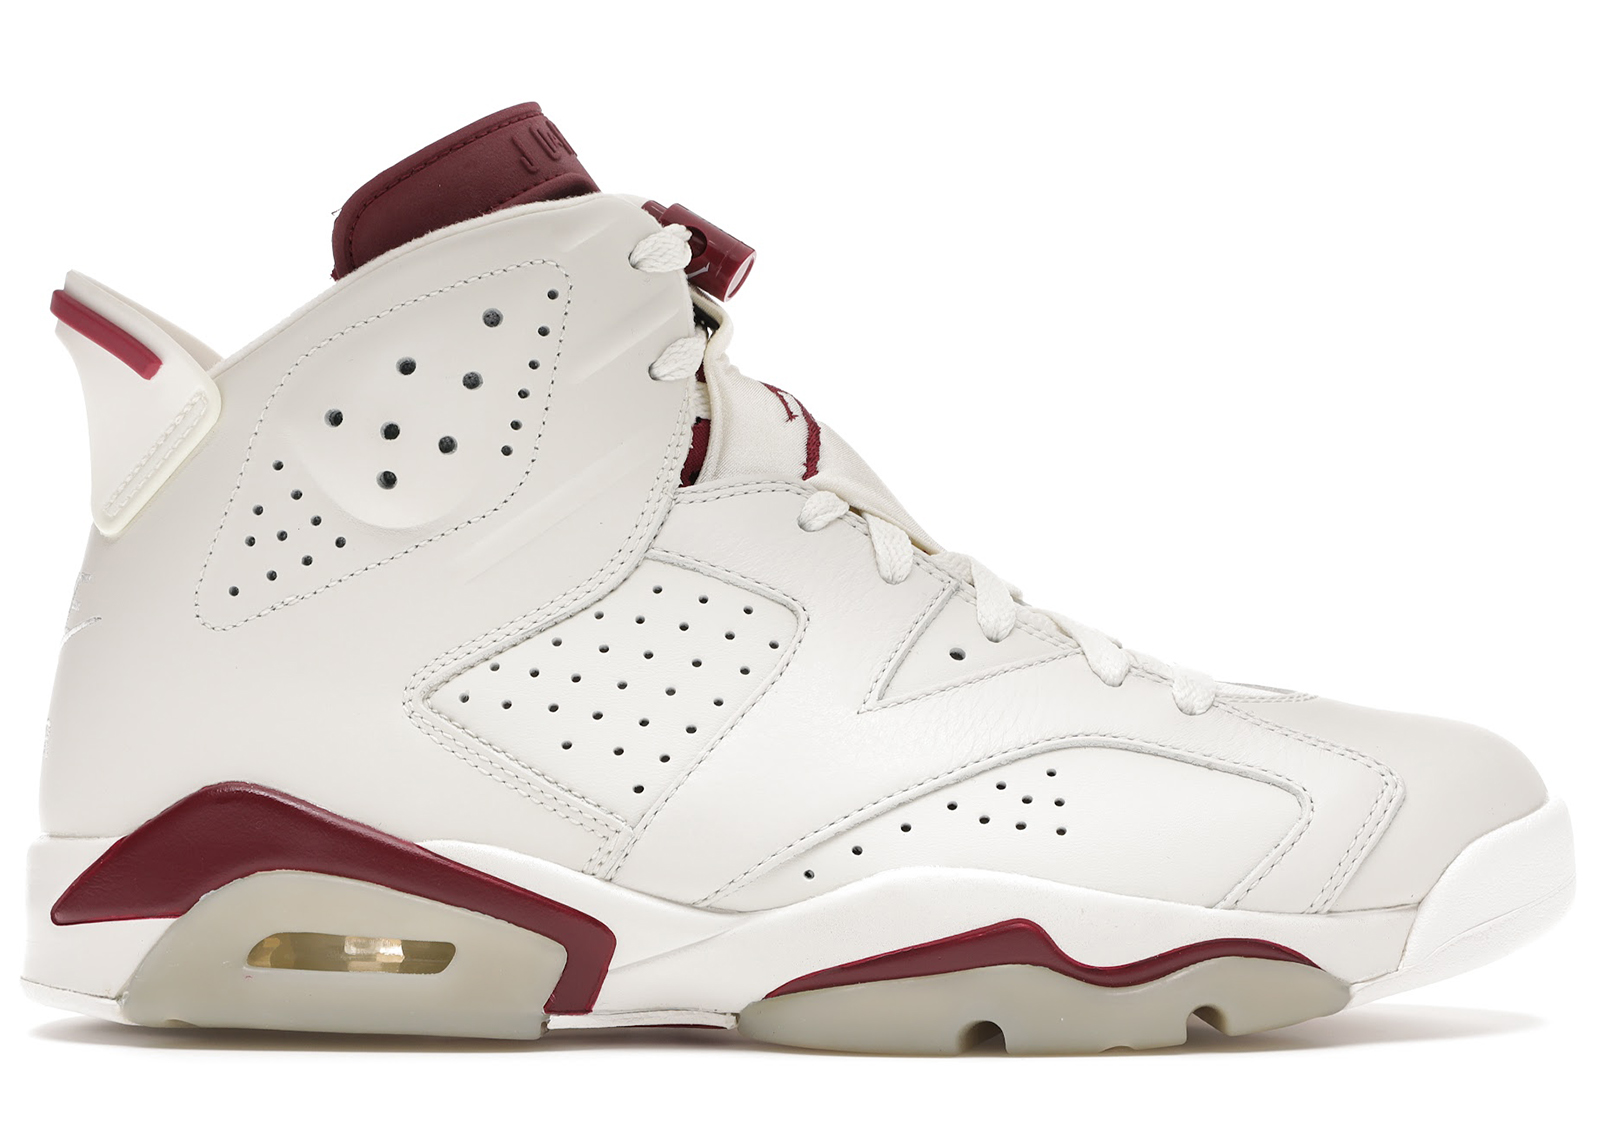 Jordan 6 - All Sizes & Colorways from $50 at StockX